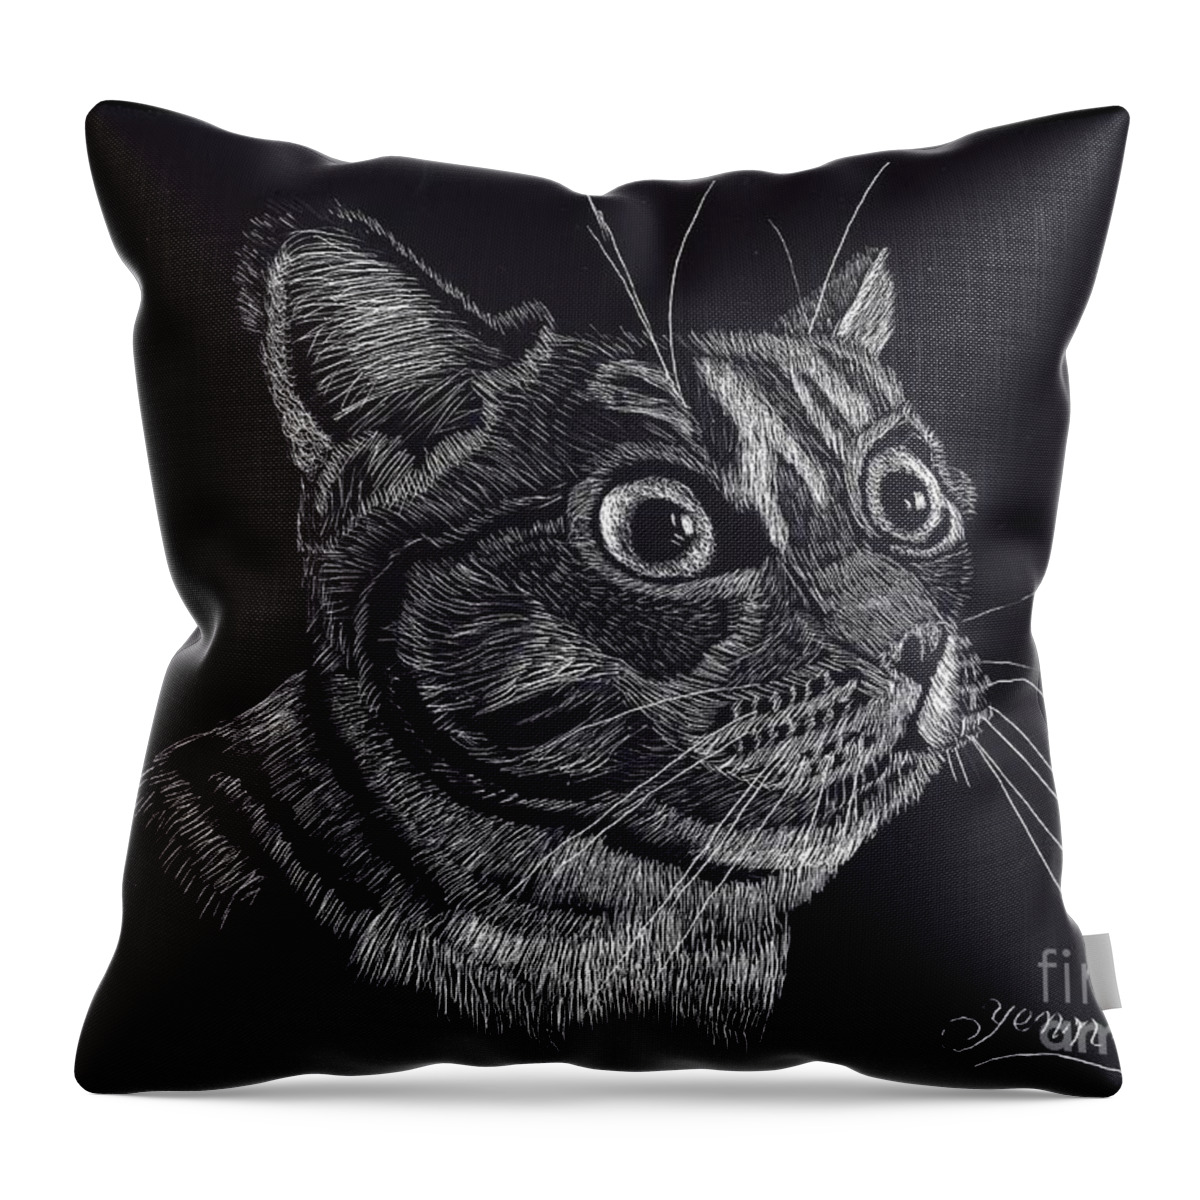 Cat Throw Pillow featuring the digital art Cat by Yenni Harrison